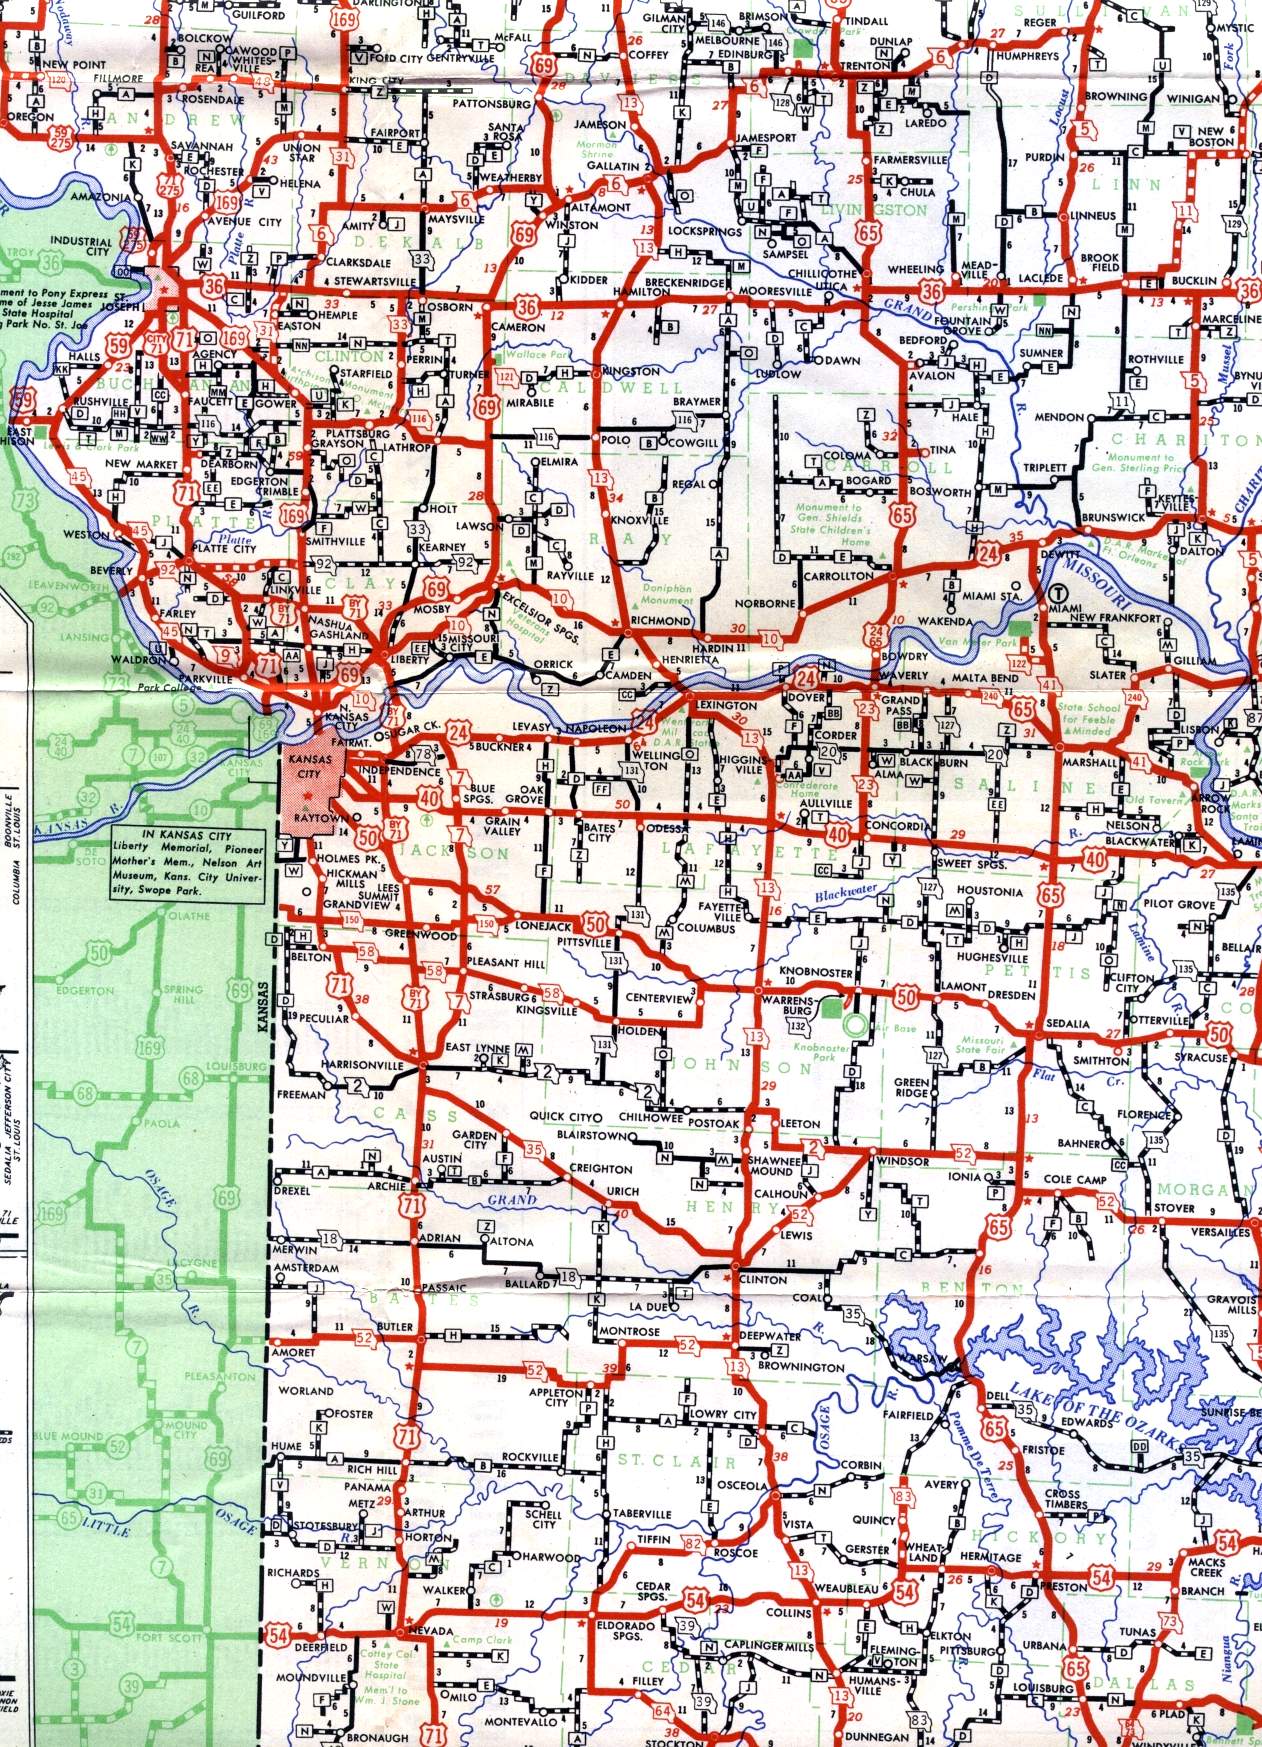 Section of 1950 official Missouri highway map